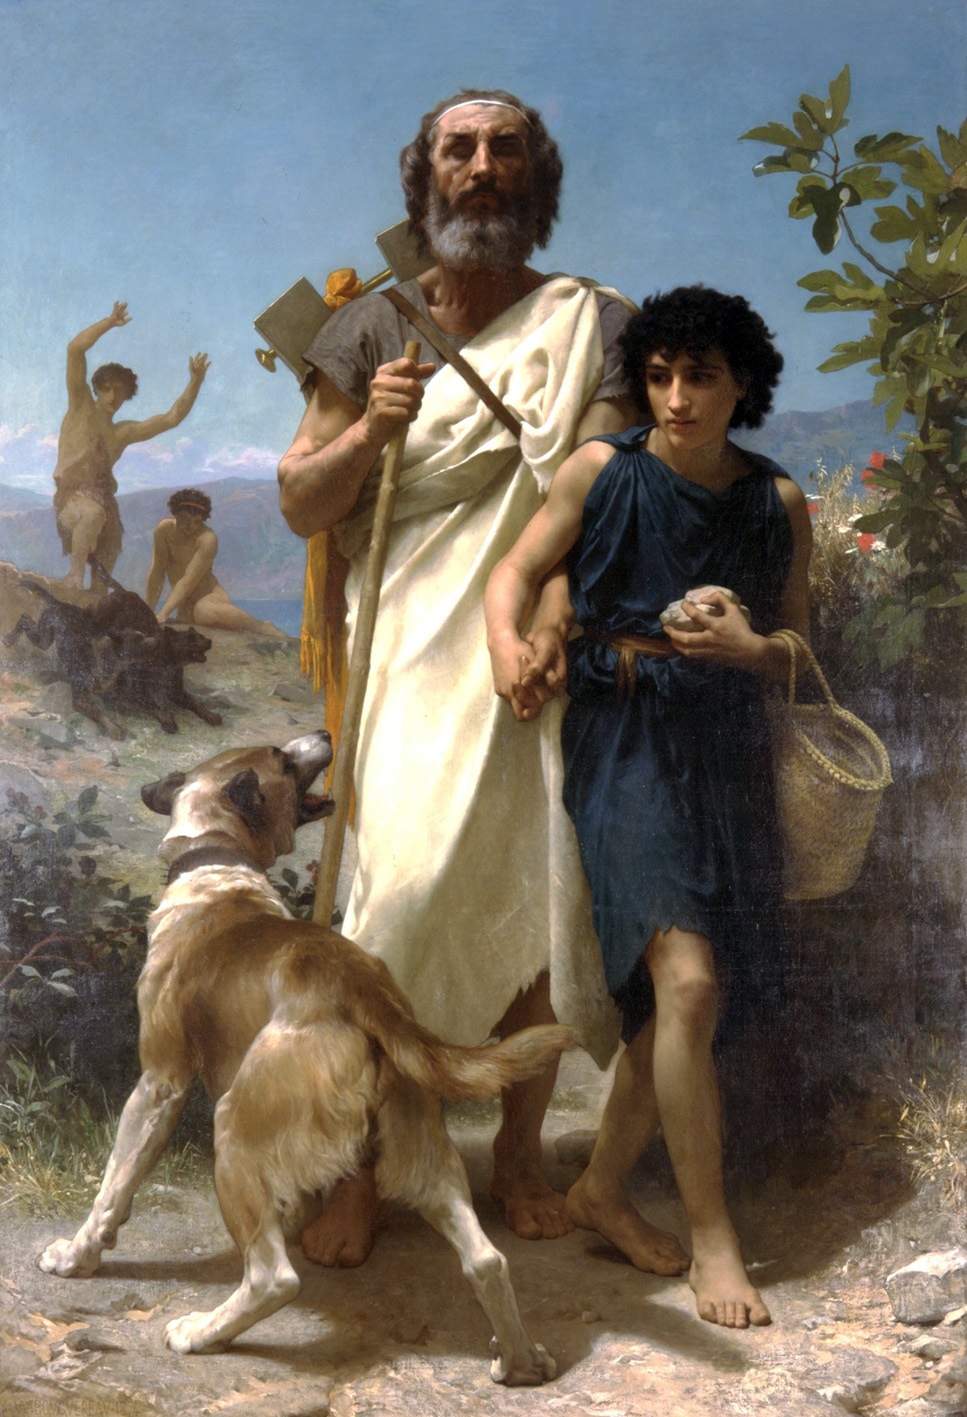 [William-Adolphe_Bouguereau_(1825-1905)_-_Homer_and_his_Guide_(1874)[6].jpg]